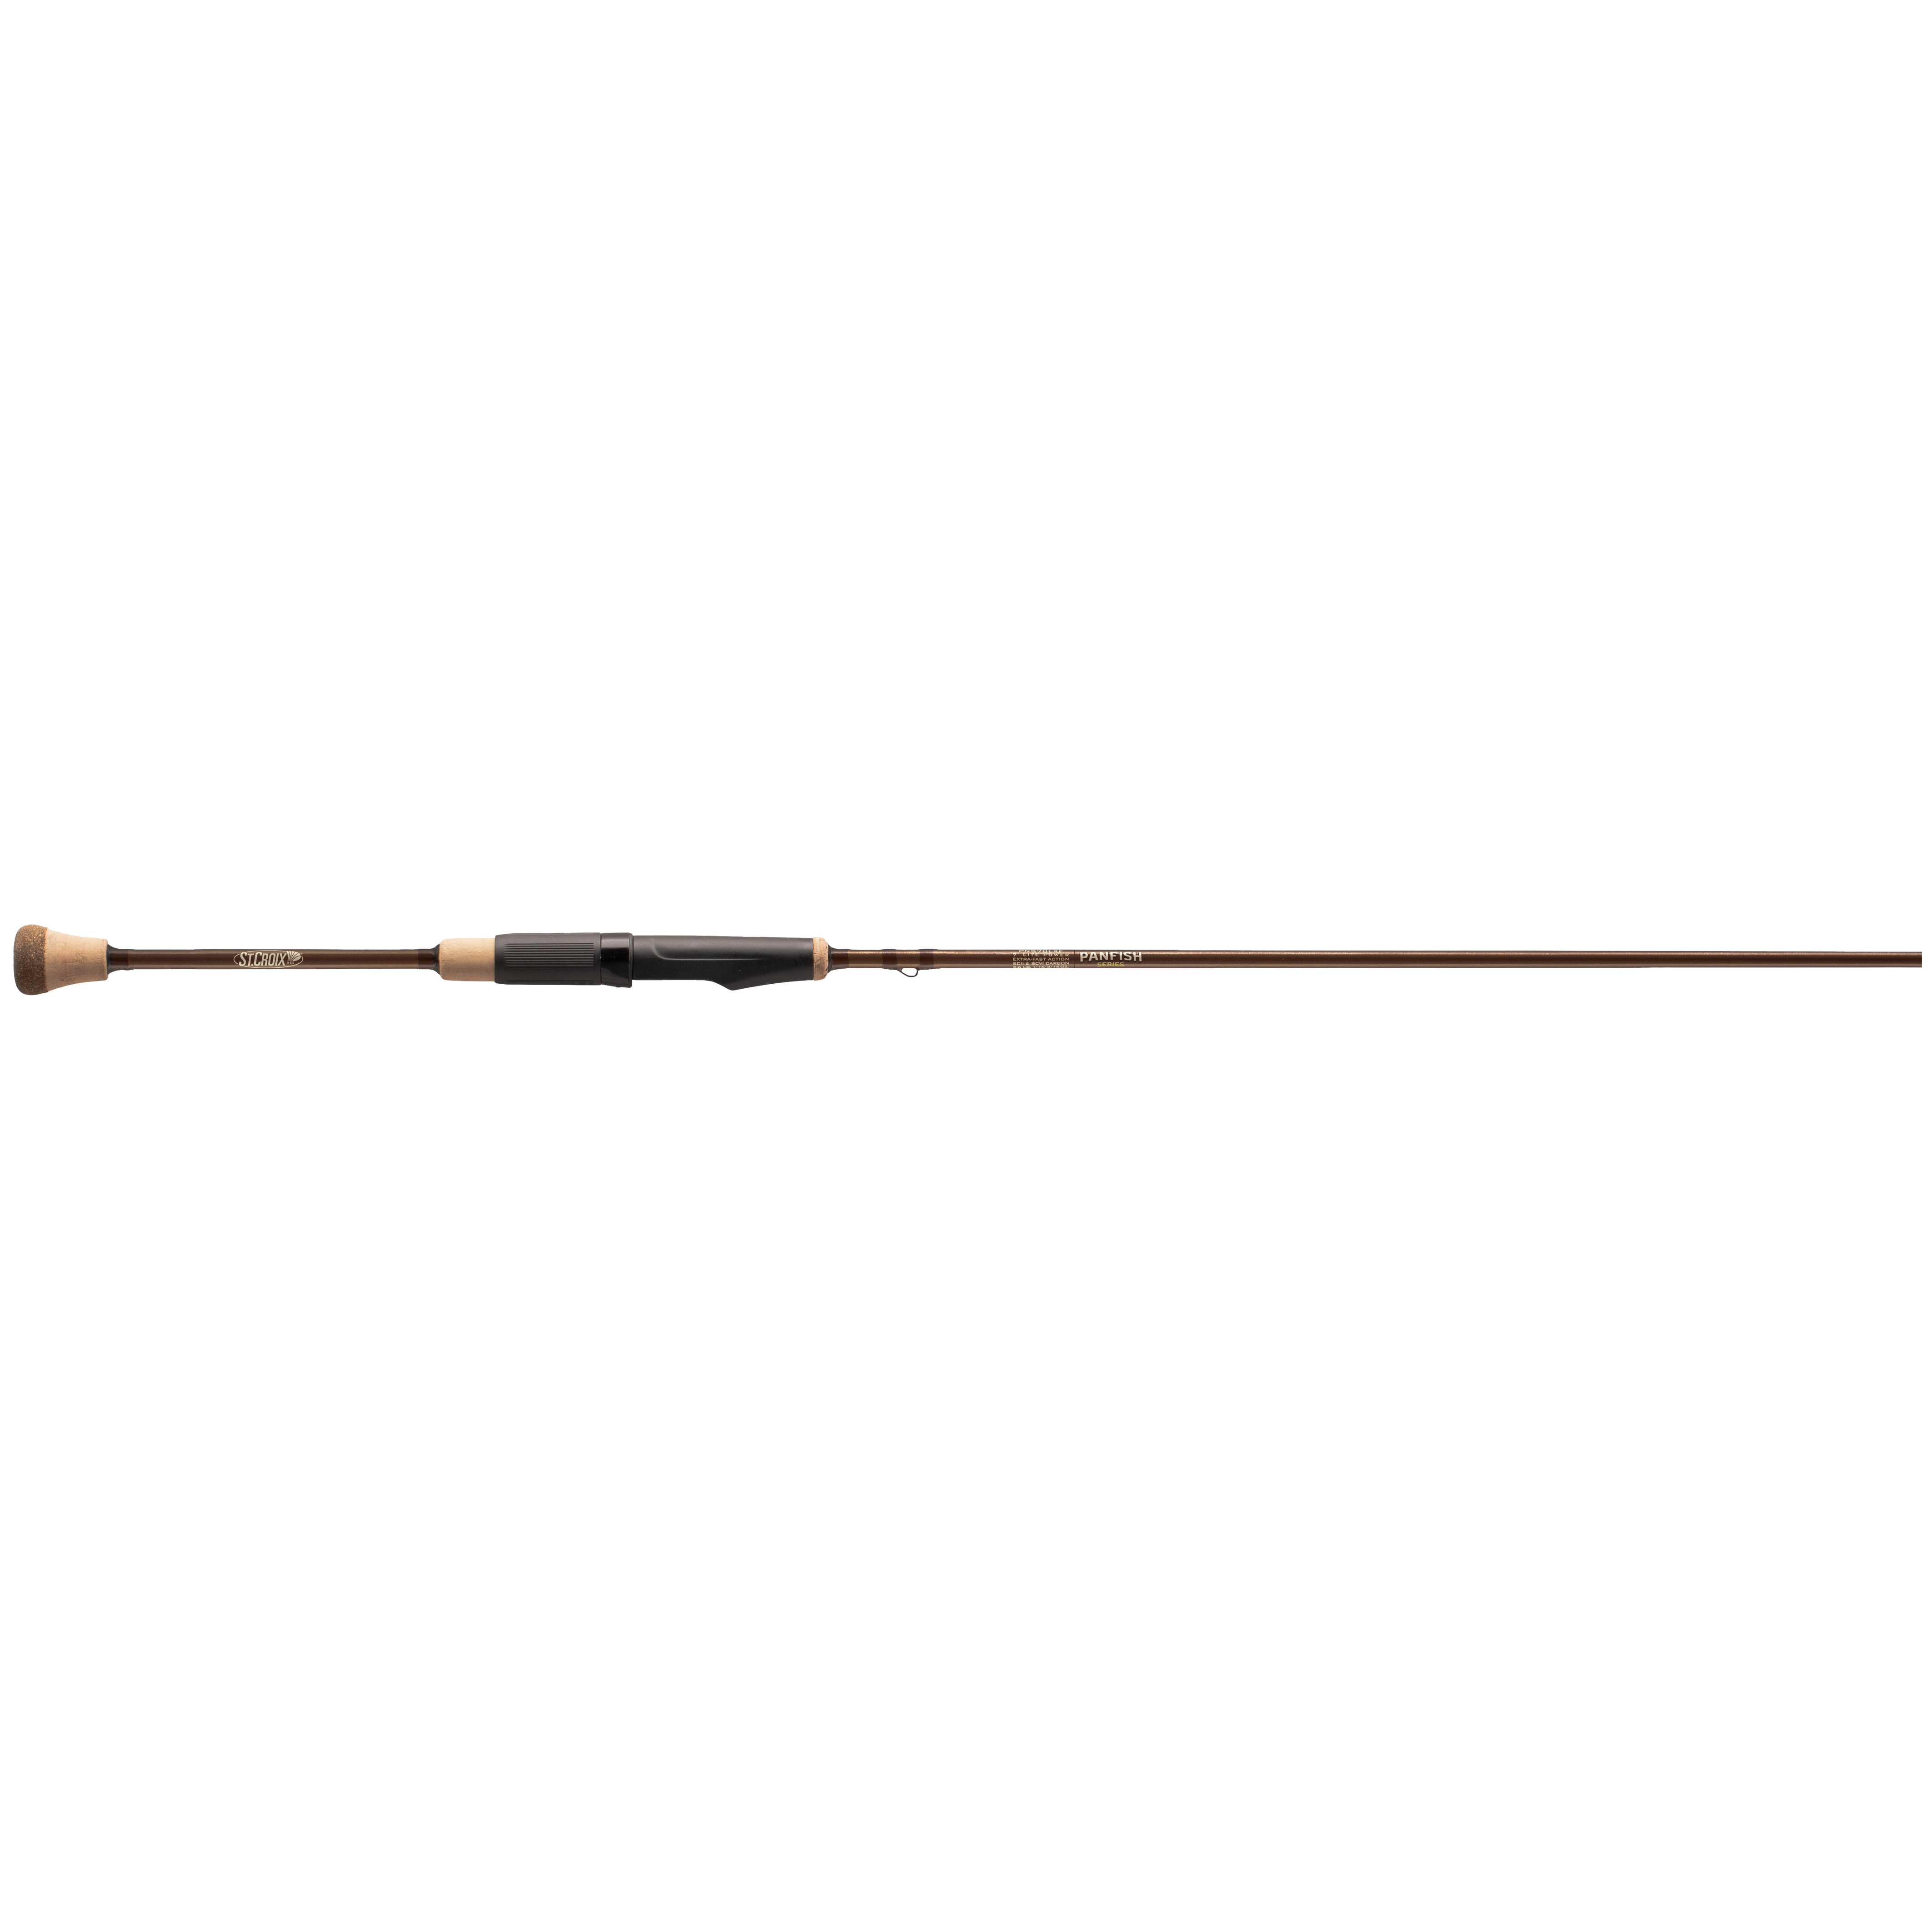 St. Croix Eyecon Spinning Rods